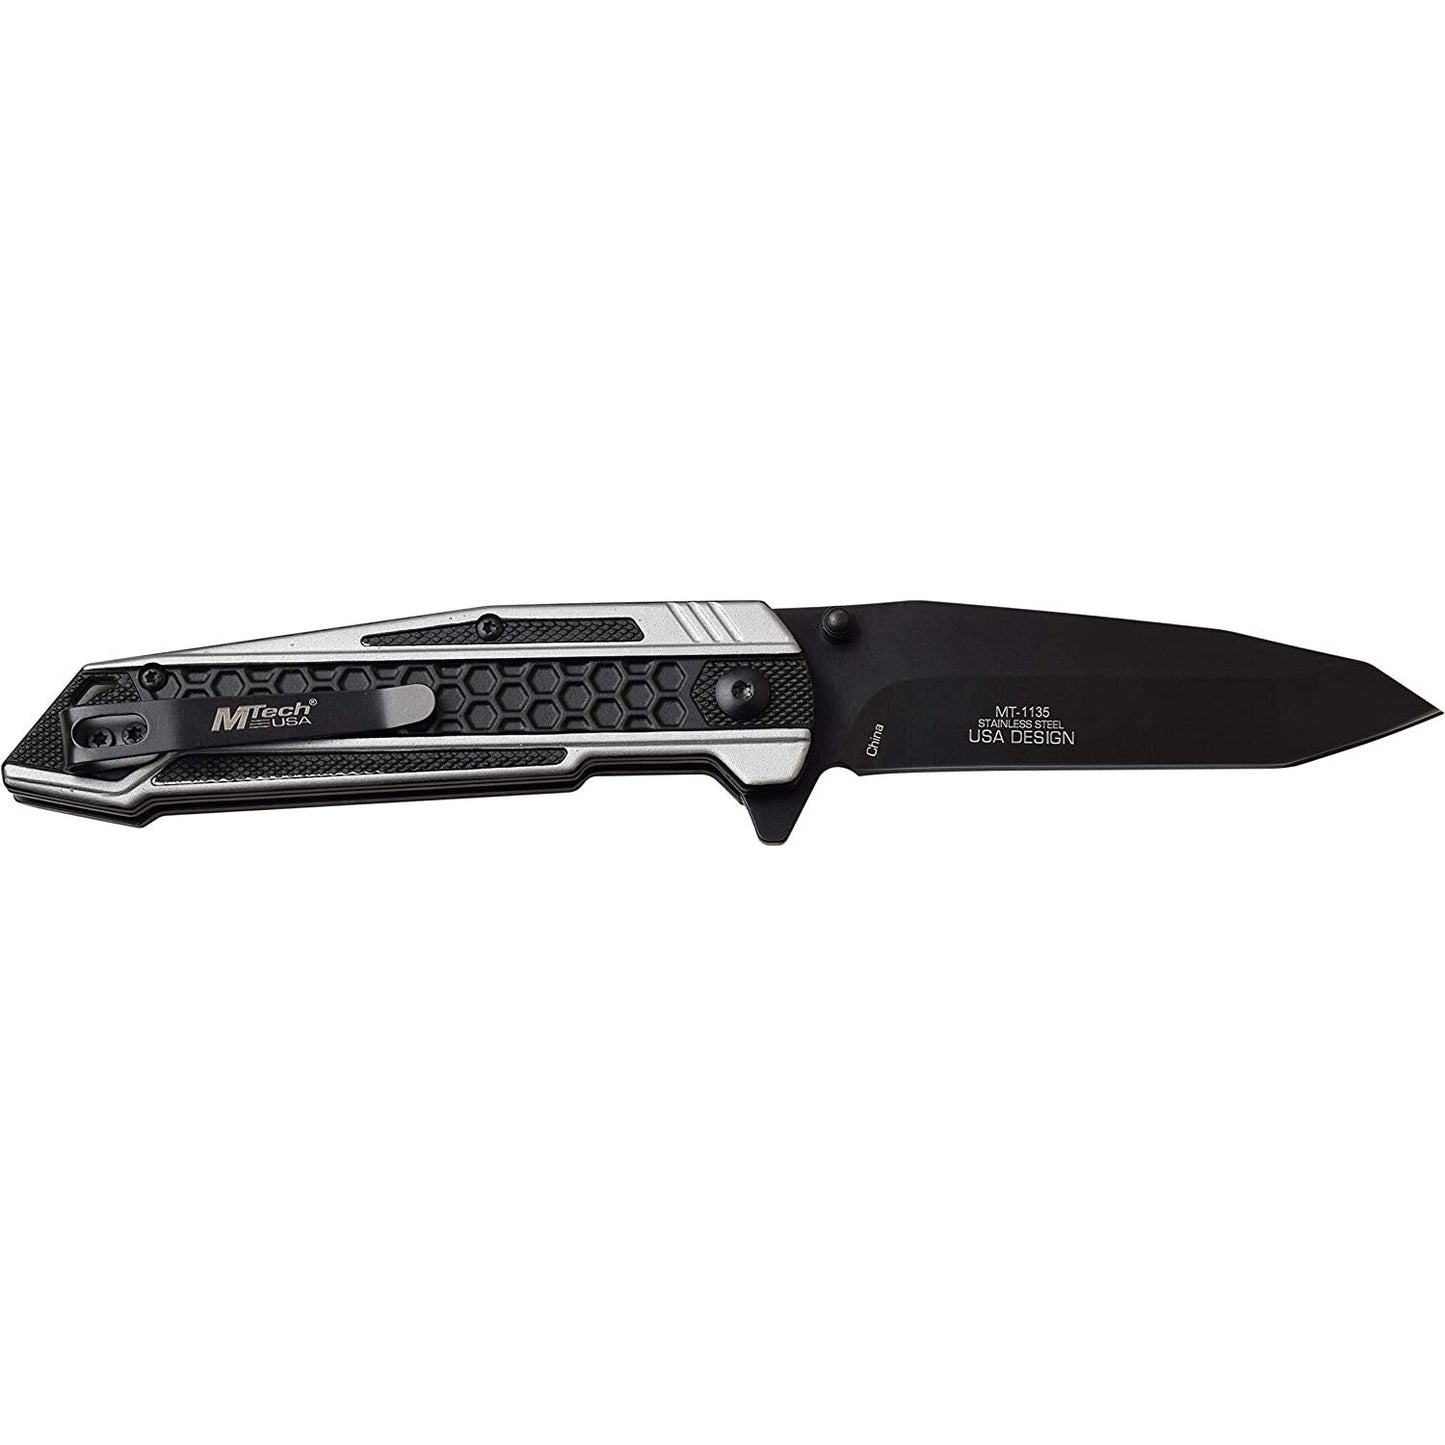 Mtech Mtech Tactical Tanto Fine Edge Blade Folding Knife - Gray Two Tone Anodized Aluminum Handle #mt-1135Gy Black